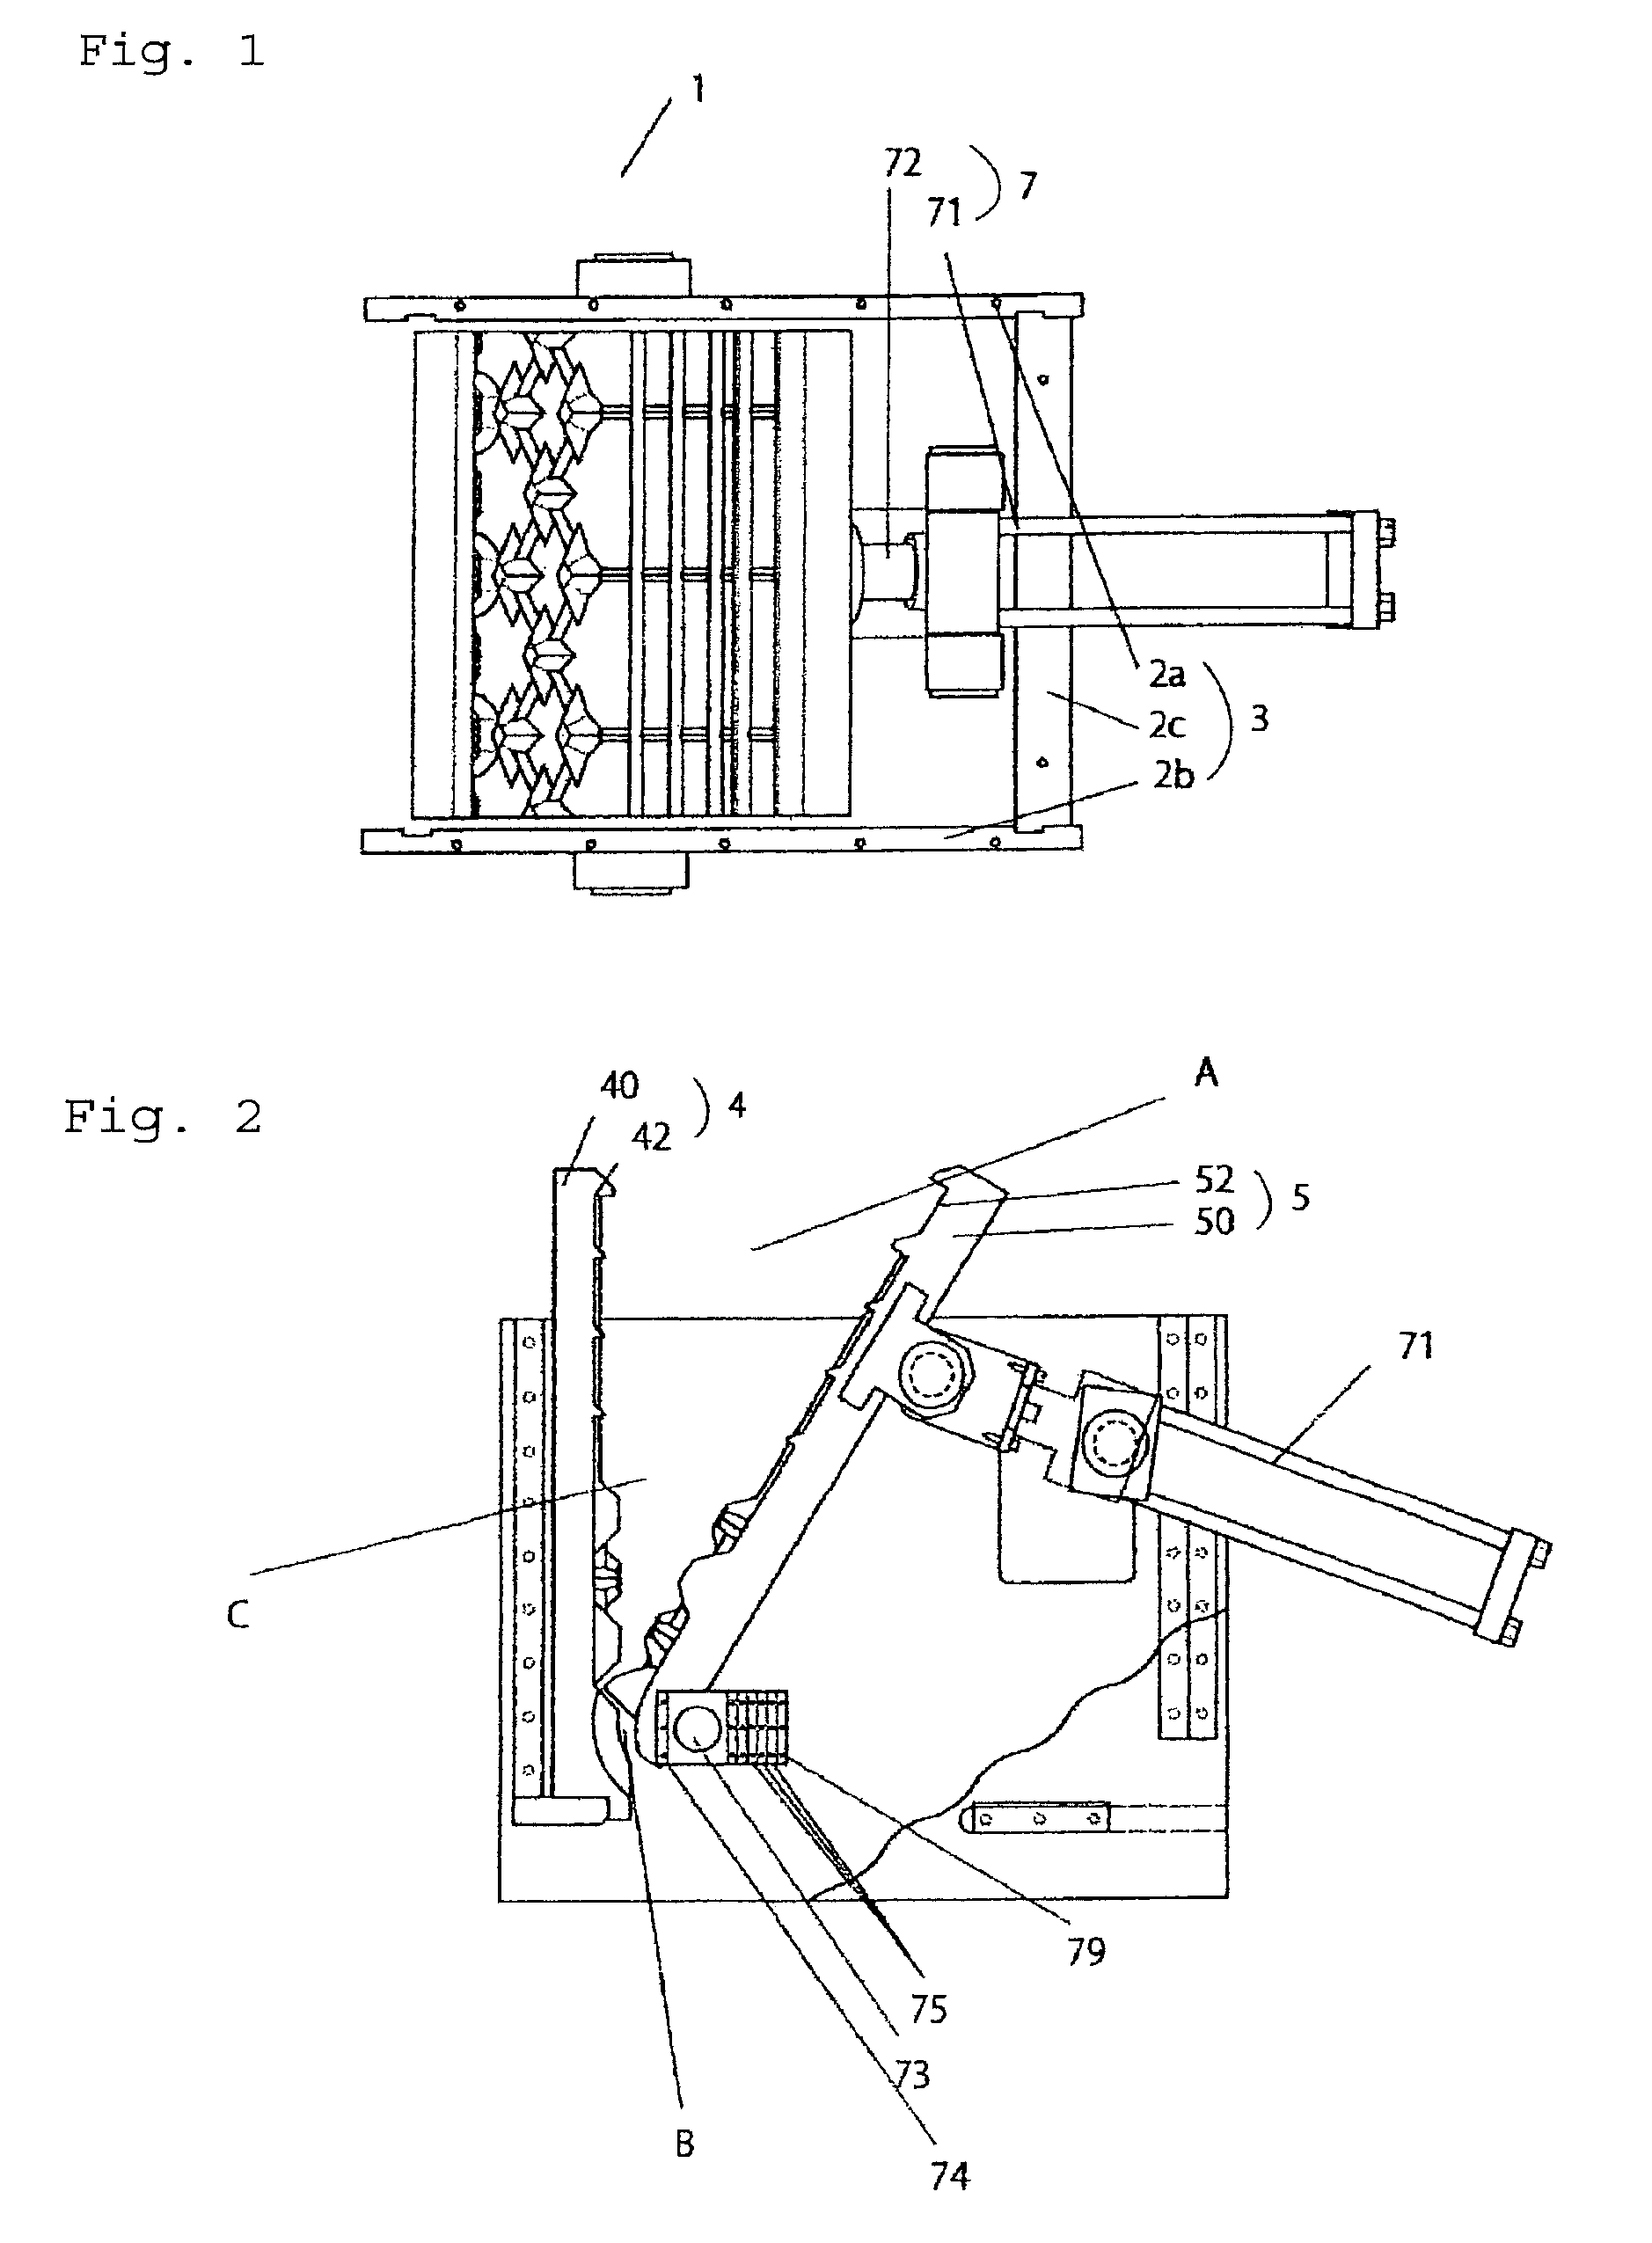 Apparatus for shearing and breaking nonferrous casting